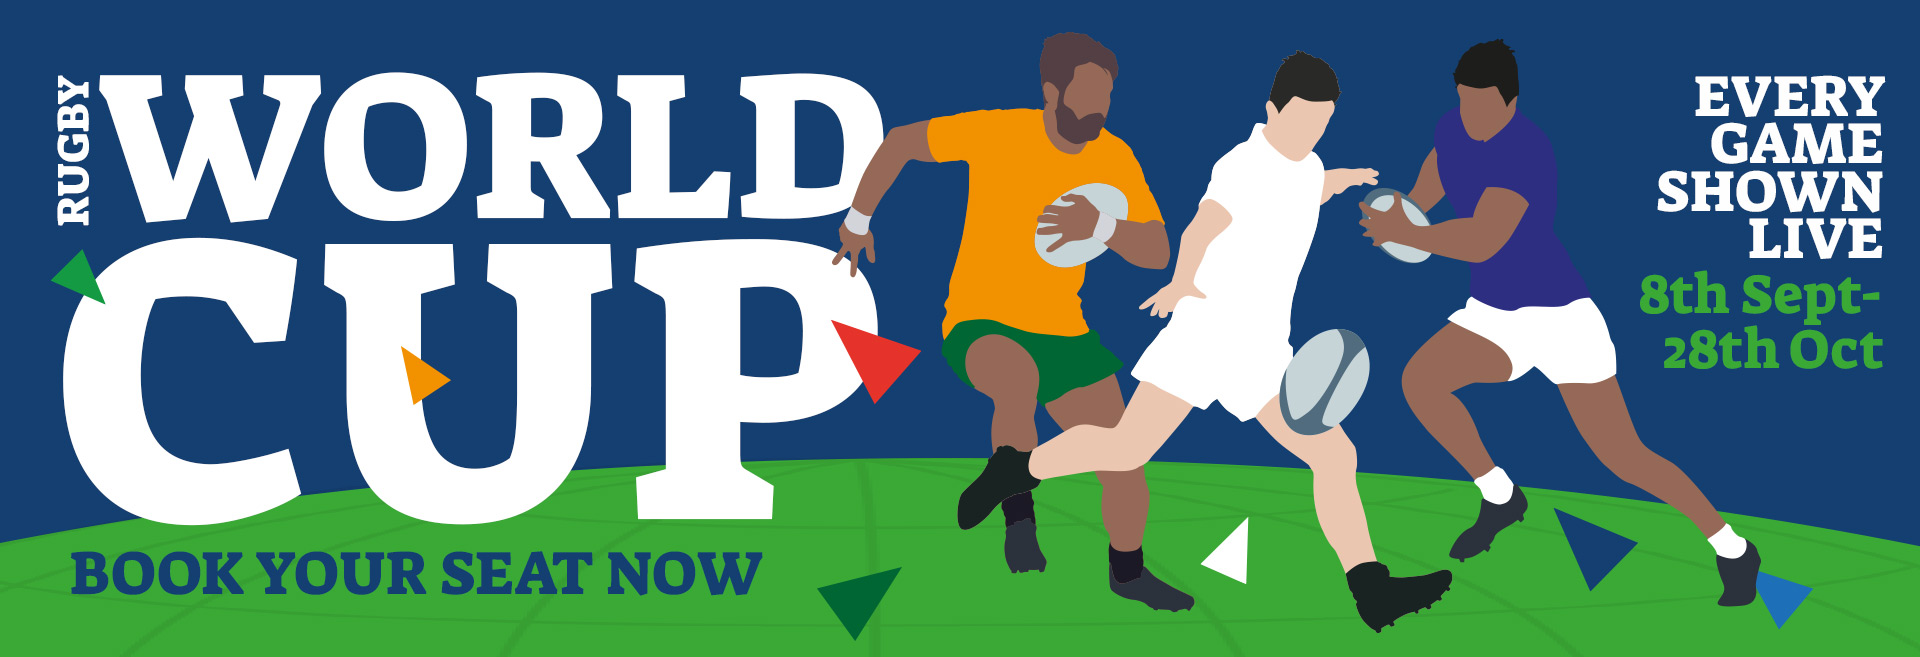 Watch the Rugby World Cup at The Castle Farringdon